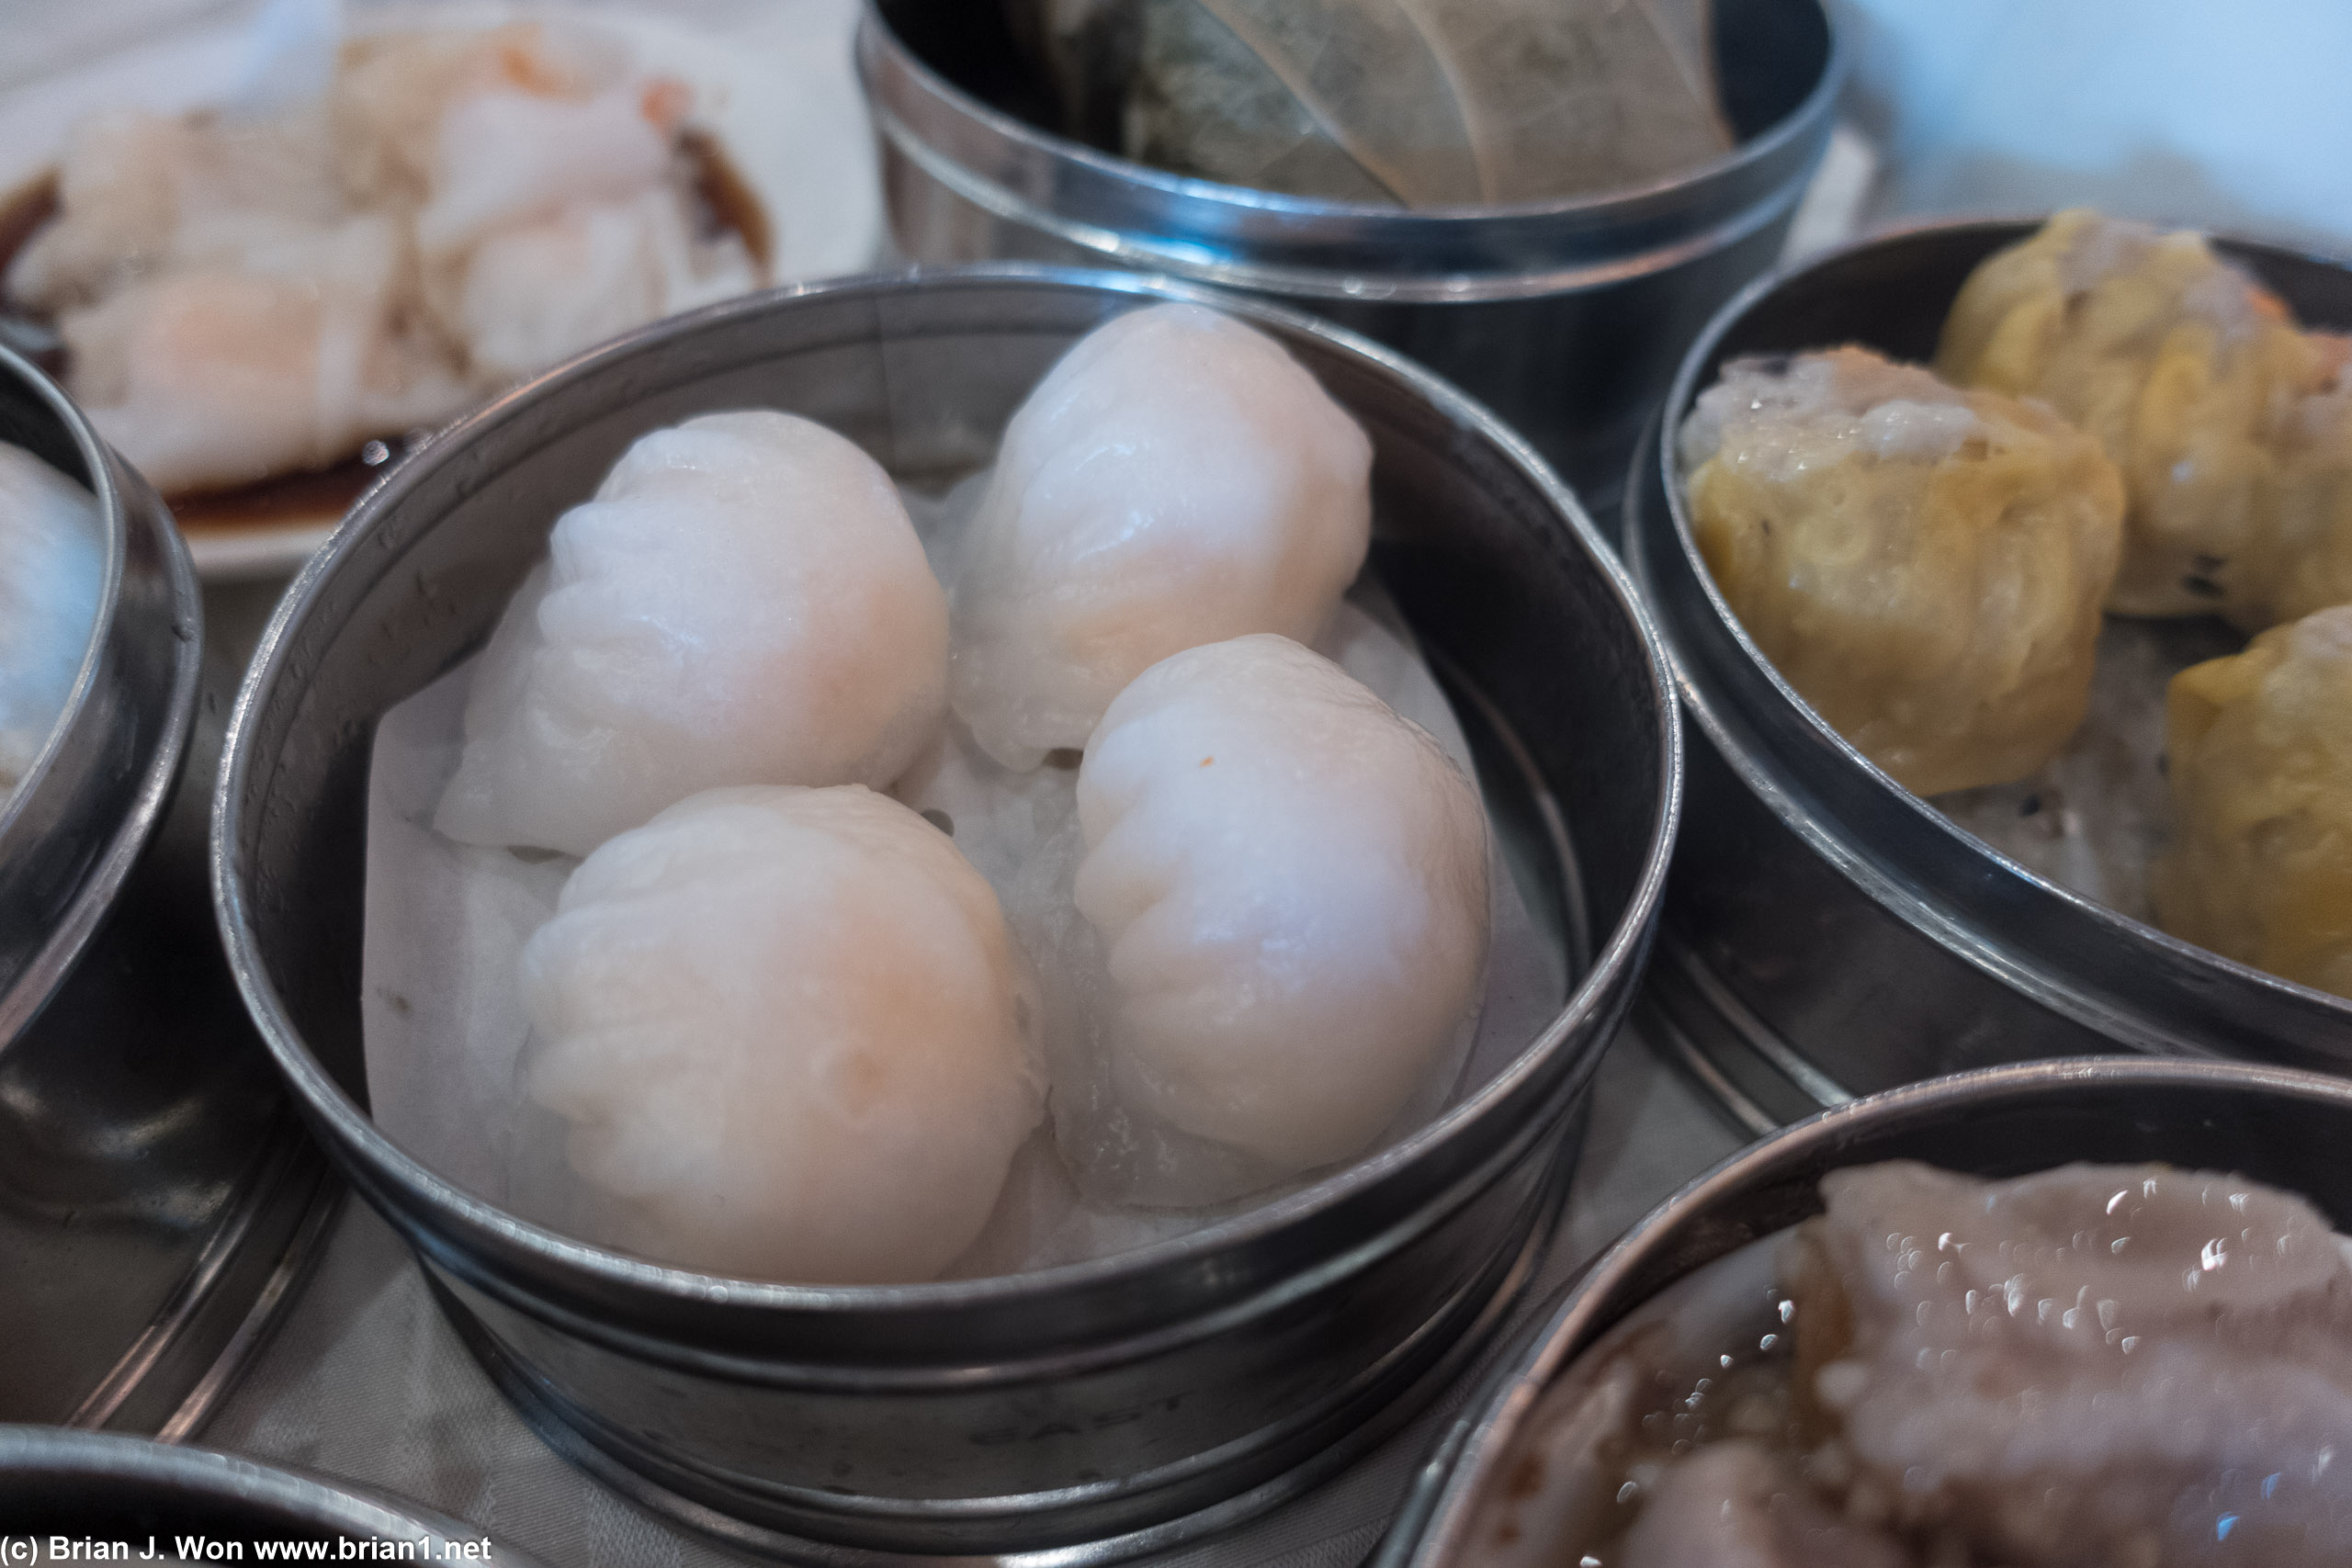 Har gow. Skins not great but they were about the right size.